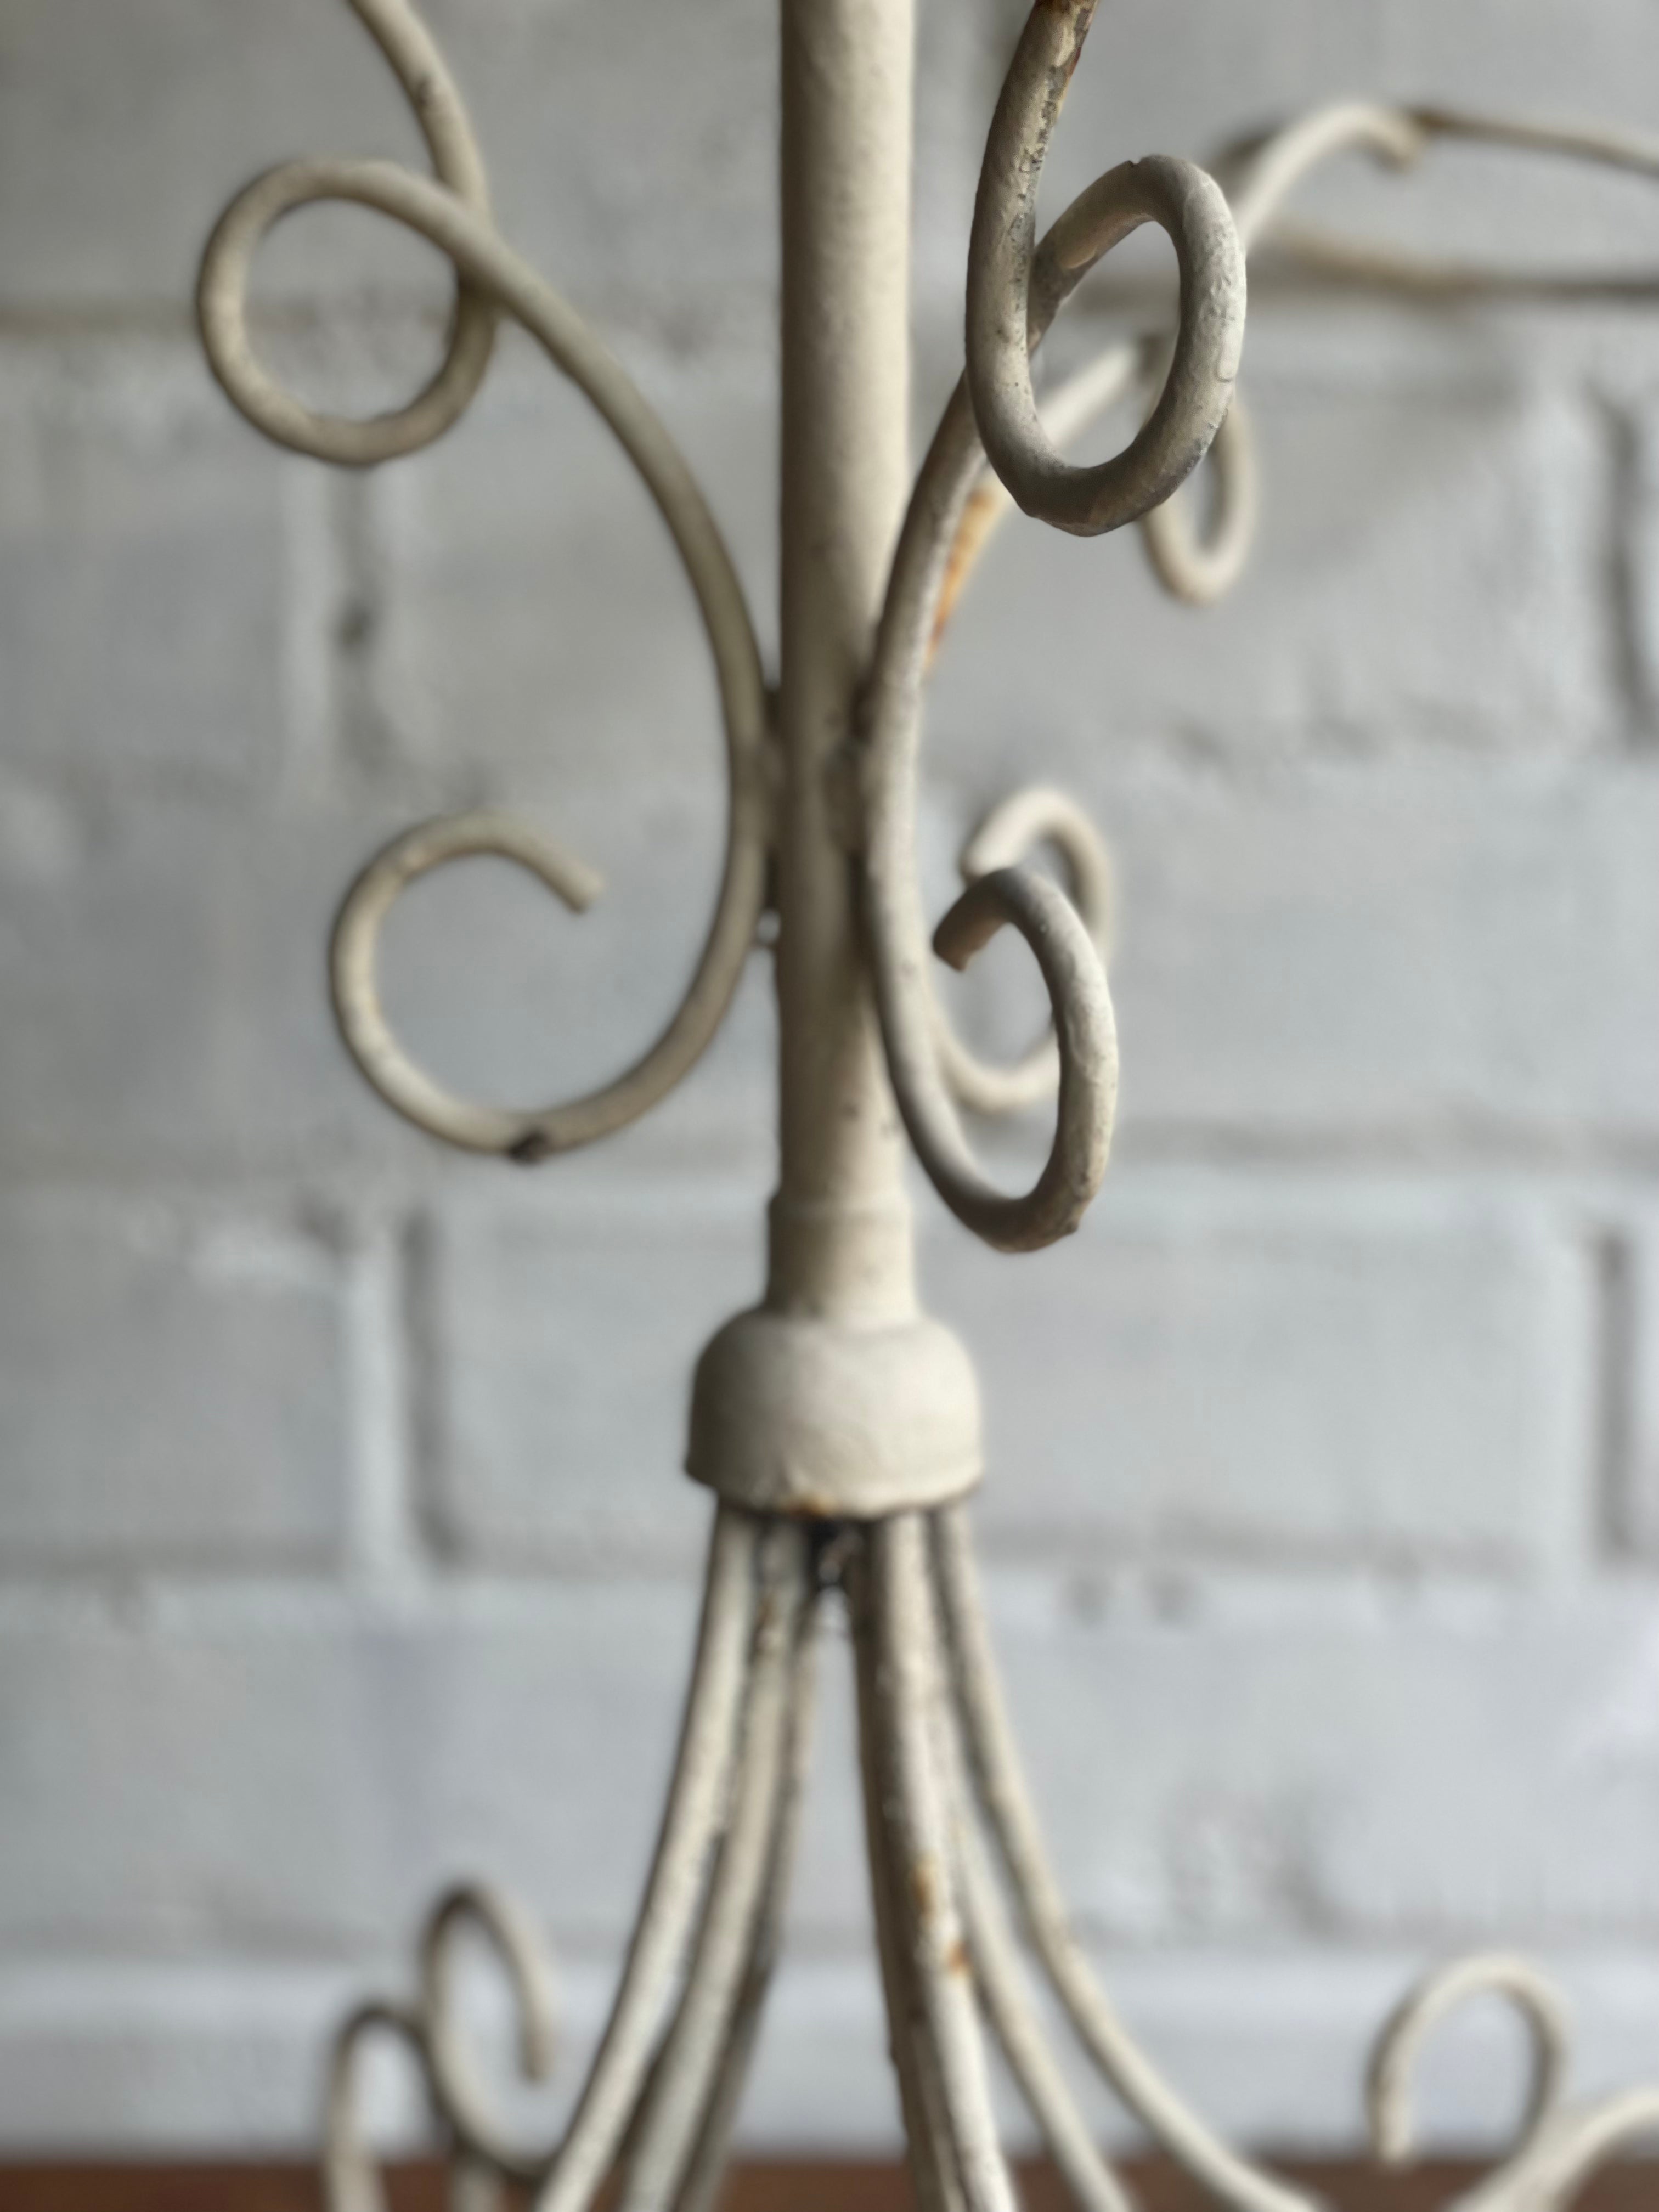 Wrought Iron “Tree” Plant Stand